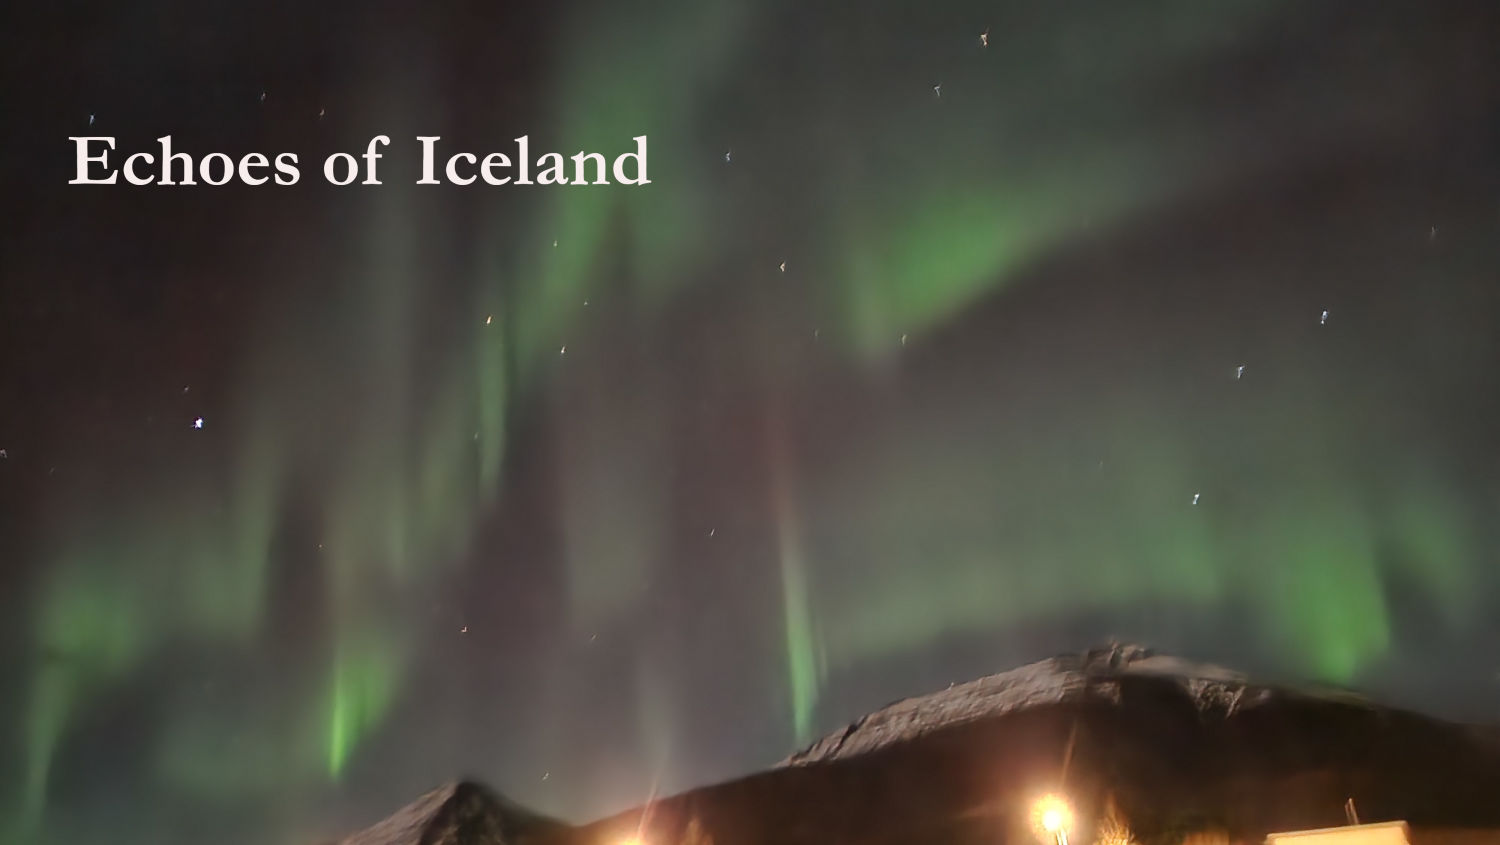 Echoes of Iceland